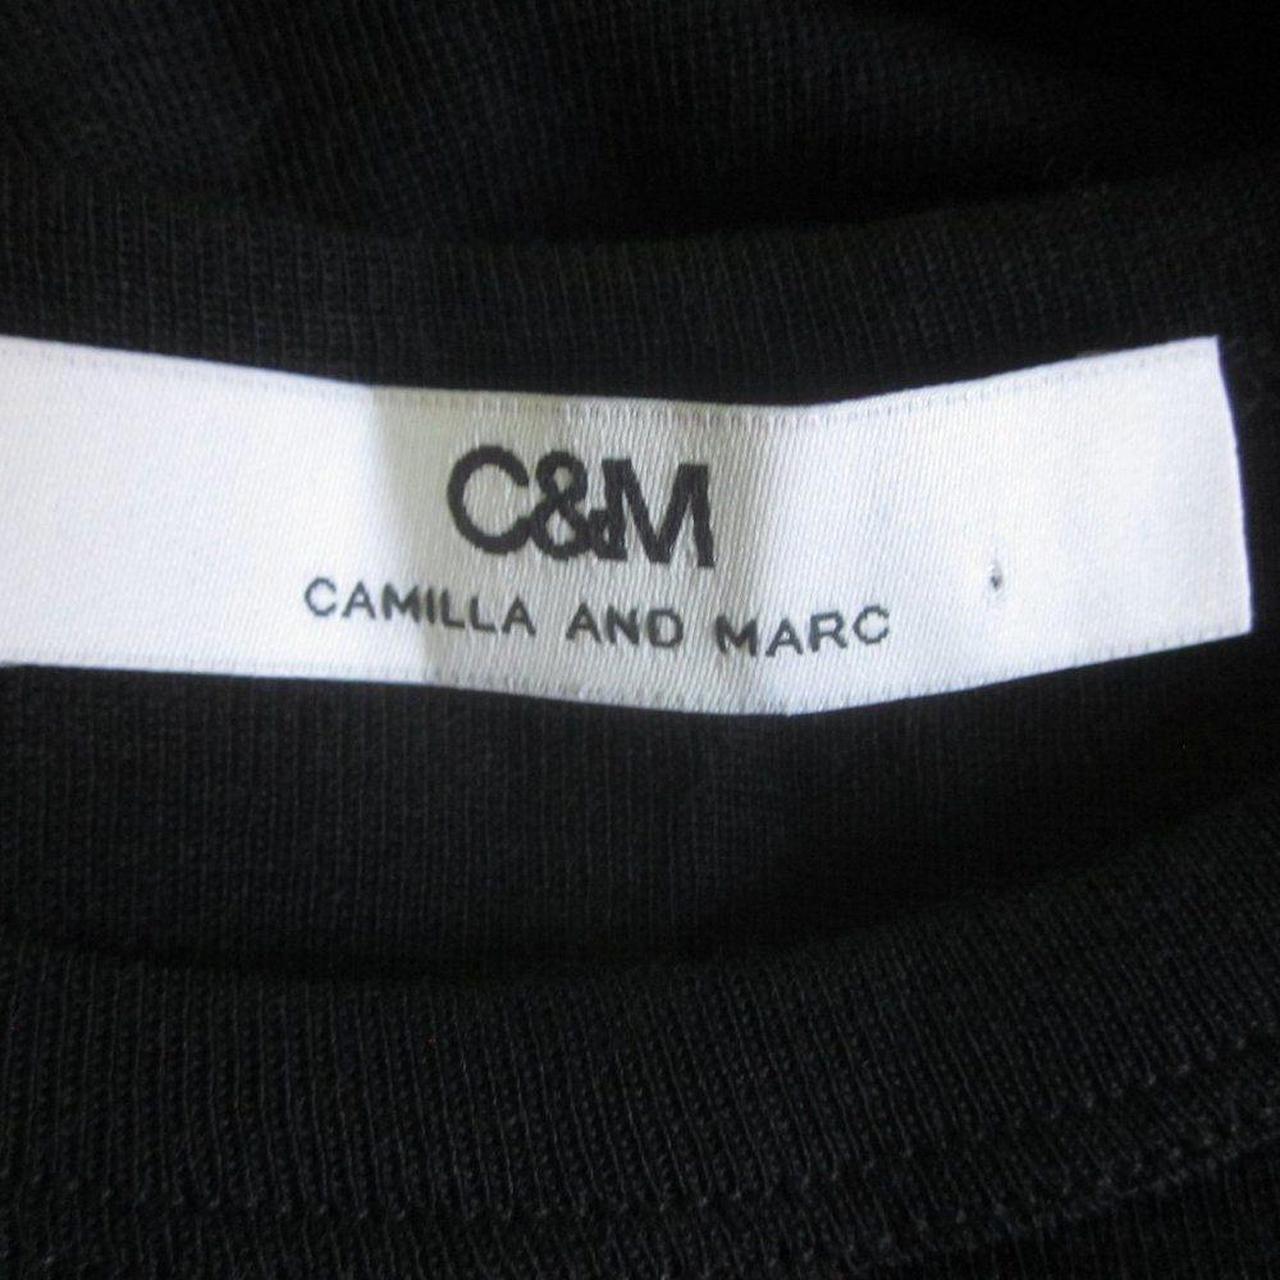 Camilla and Marc Women's Black and Blue Shirt (4)